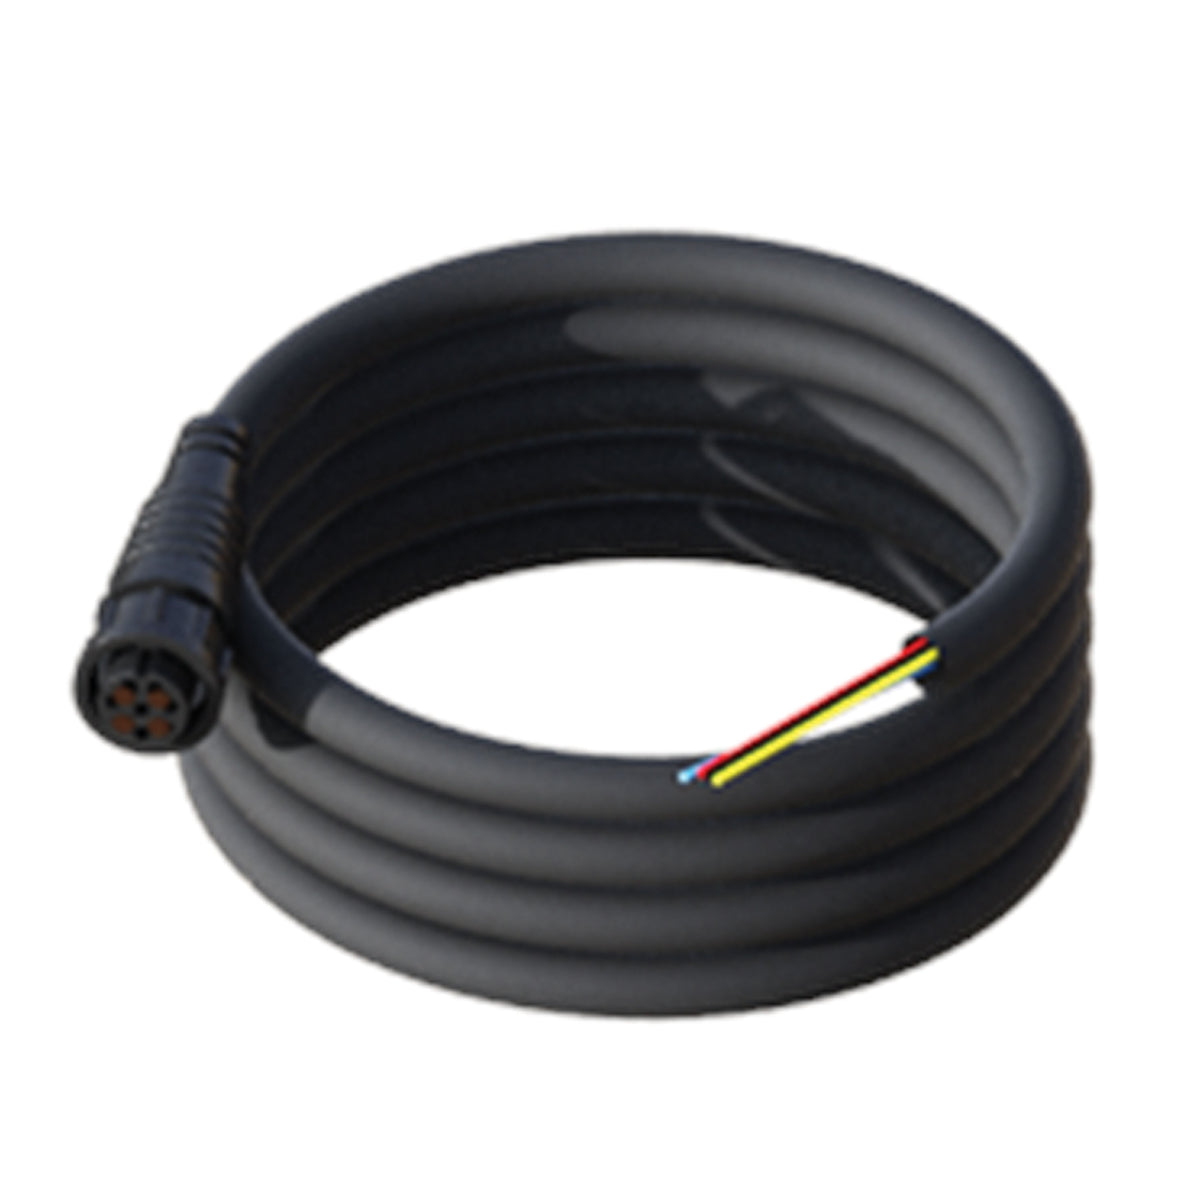 Lowrance 000-00128-001 StructureScan - Power Cable